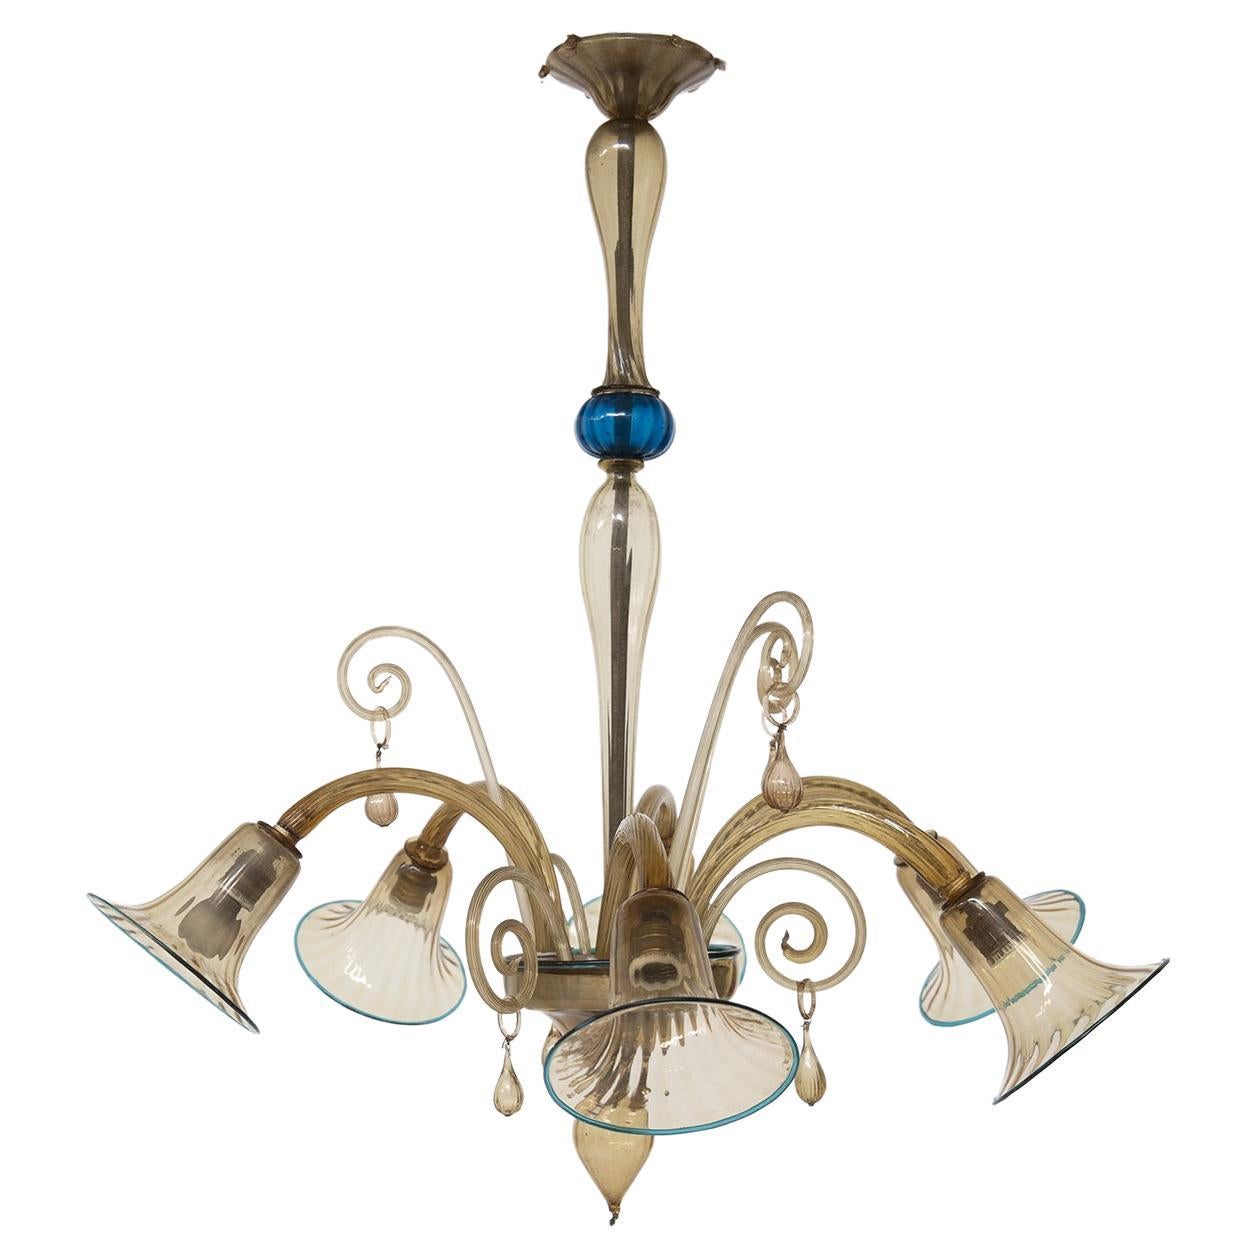 Amber Murano Glass Chandelier with Blue Edges by Cappellin